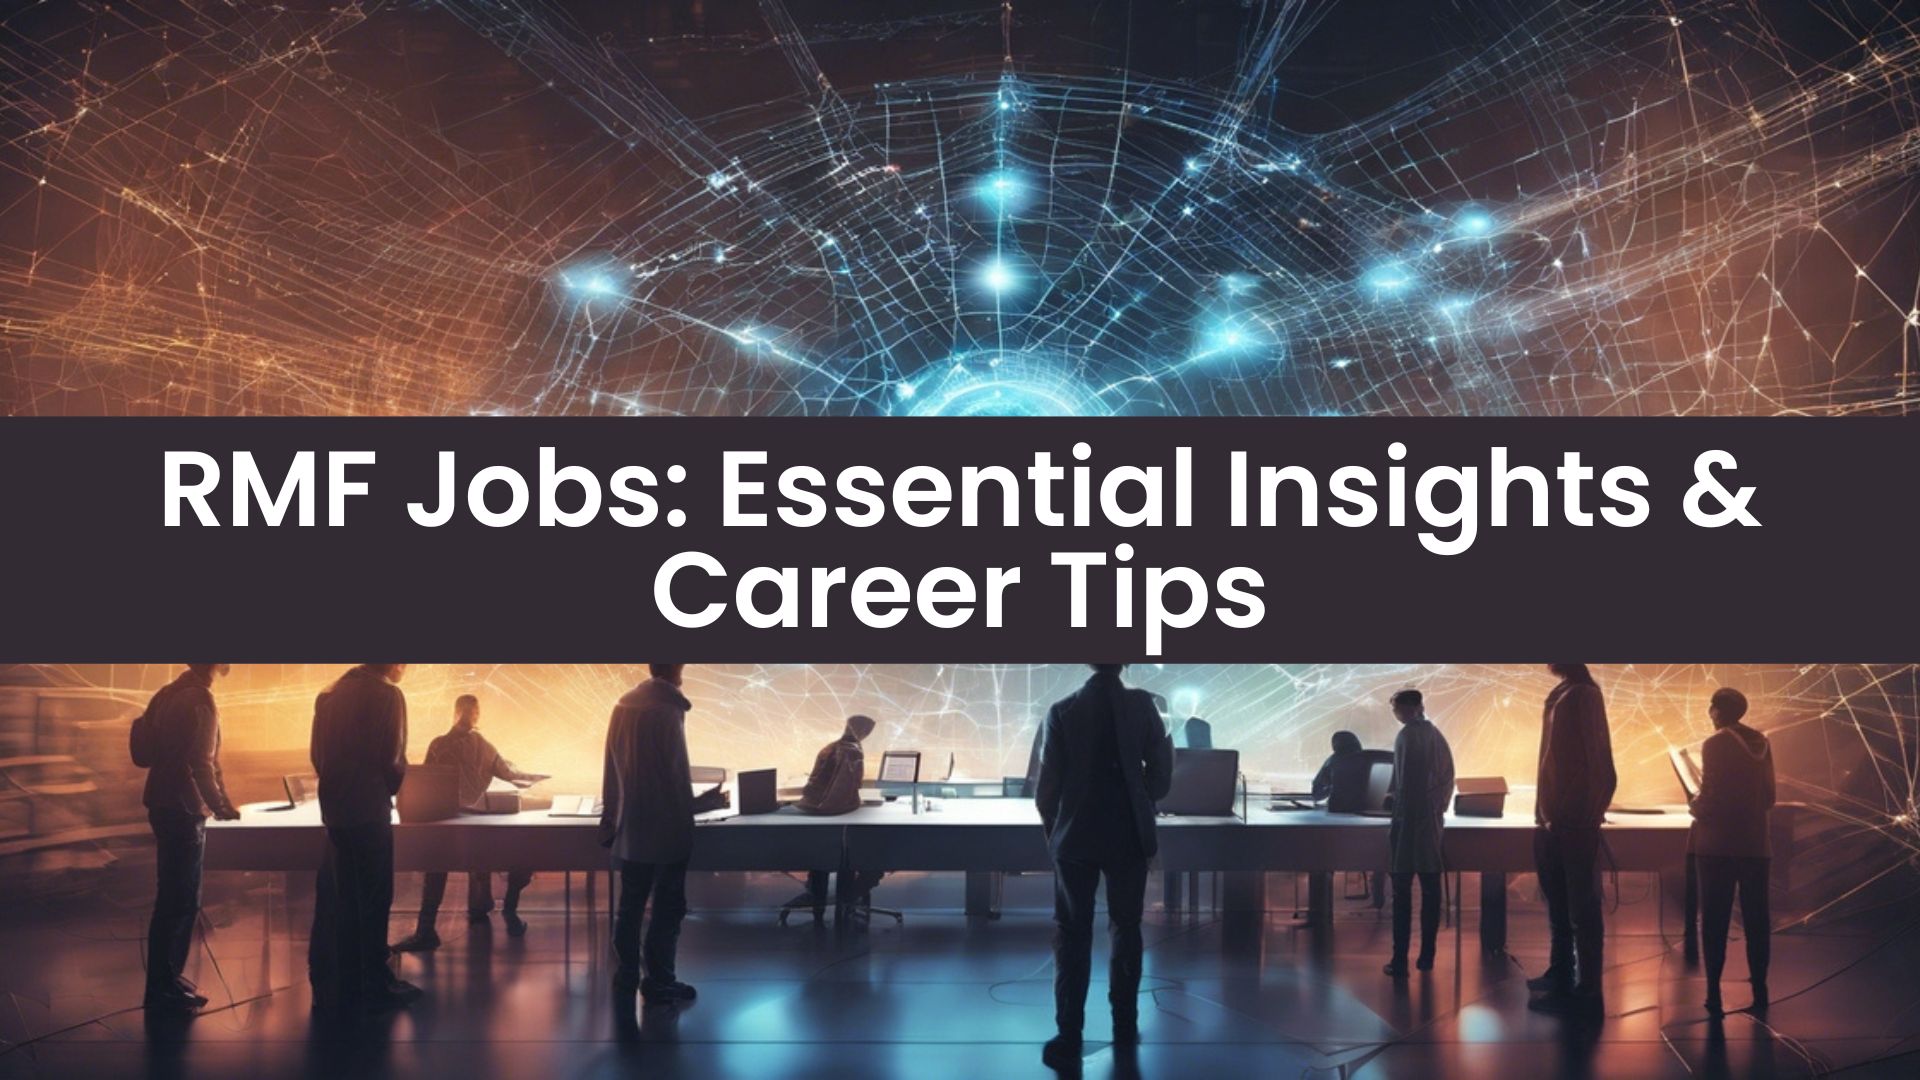 RMF Jobs Essential Insights & Career Tips